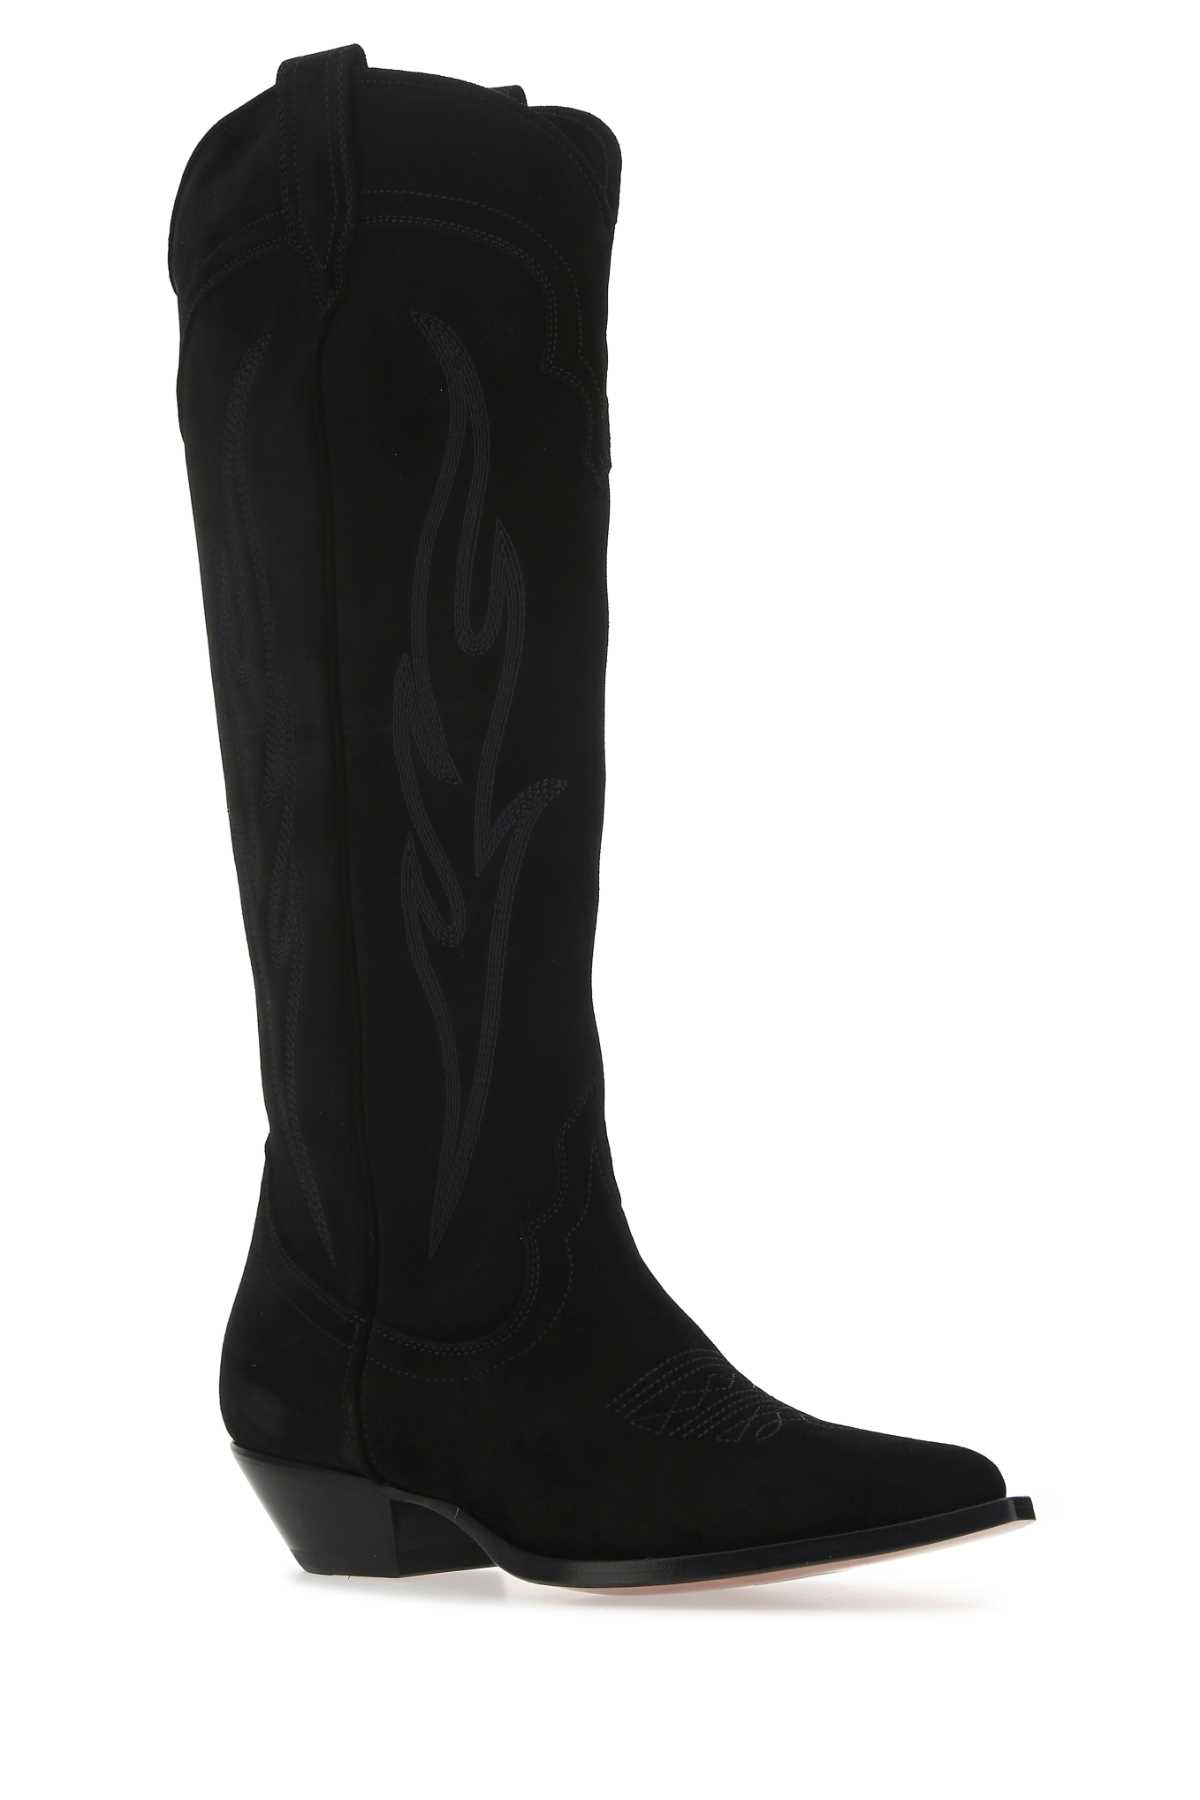 Shop Sonora Black Suede Roswell Boots